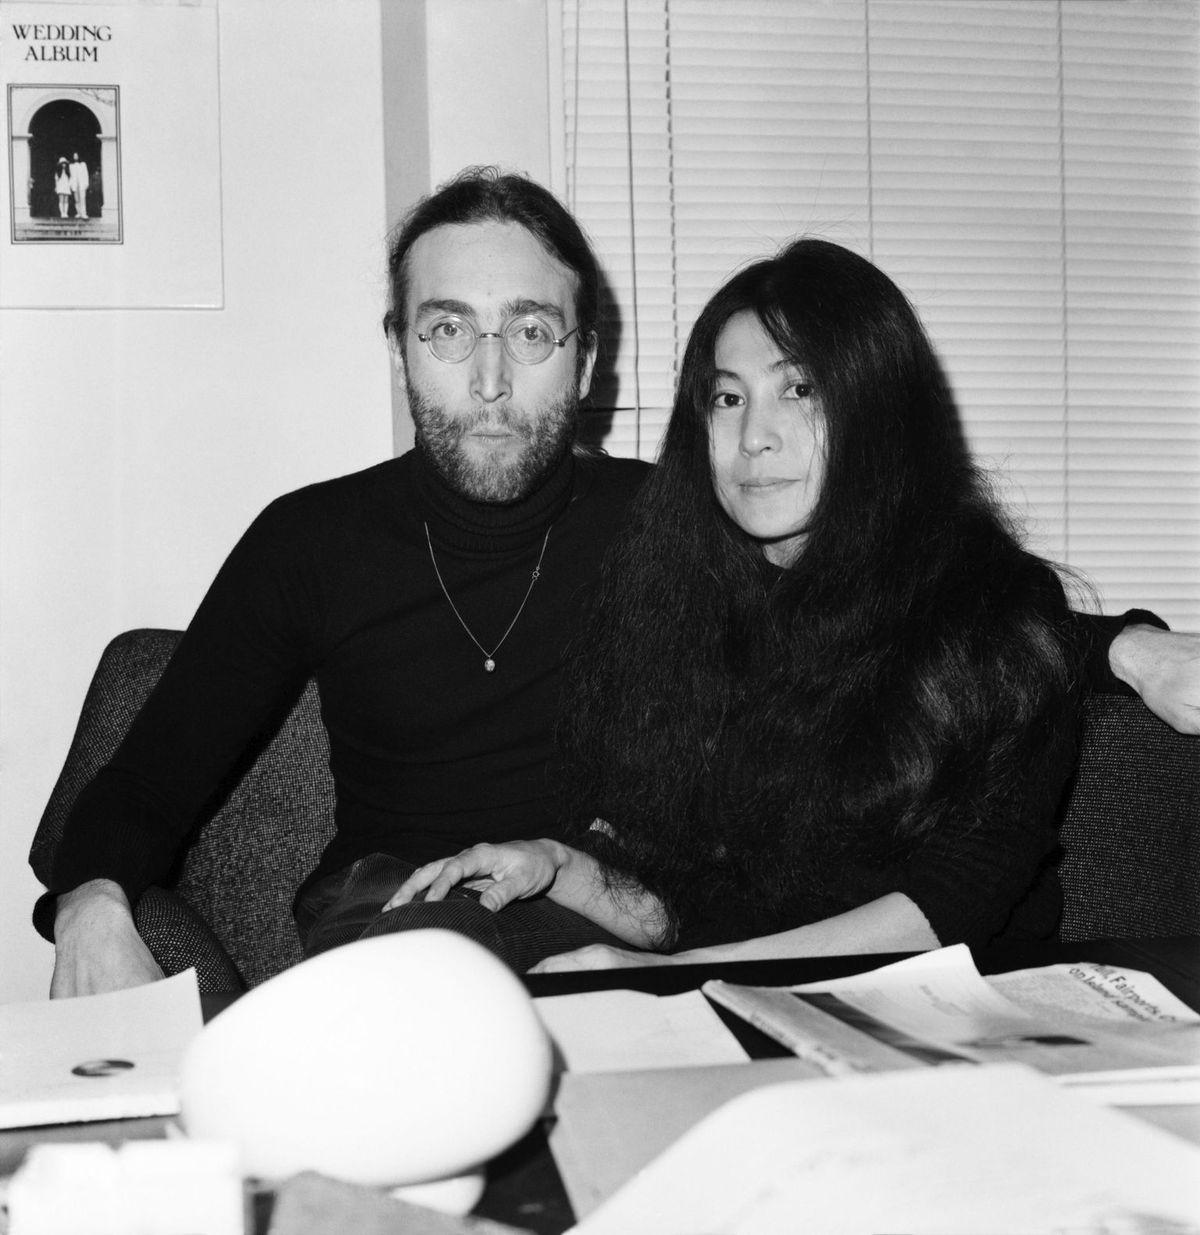 Beatles singer John Lennon with wife Yoko Ono at Apple's headquarters as he sends his MBE back to The Queen on November 25, 1969 | Photo: WATFORD/Mirrorpix/Getty Images